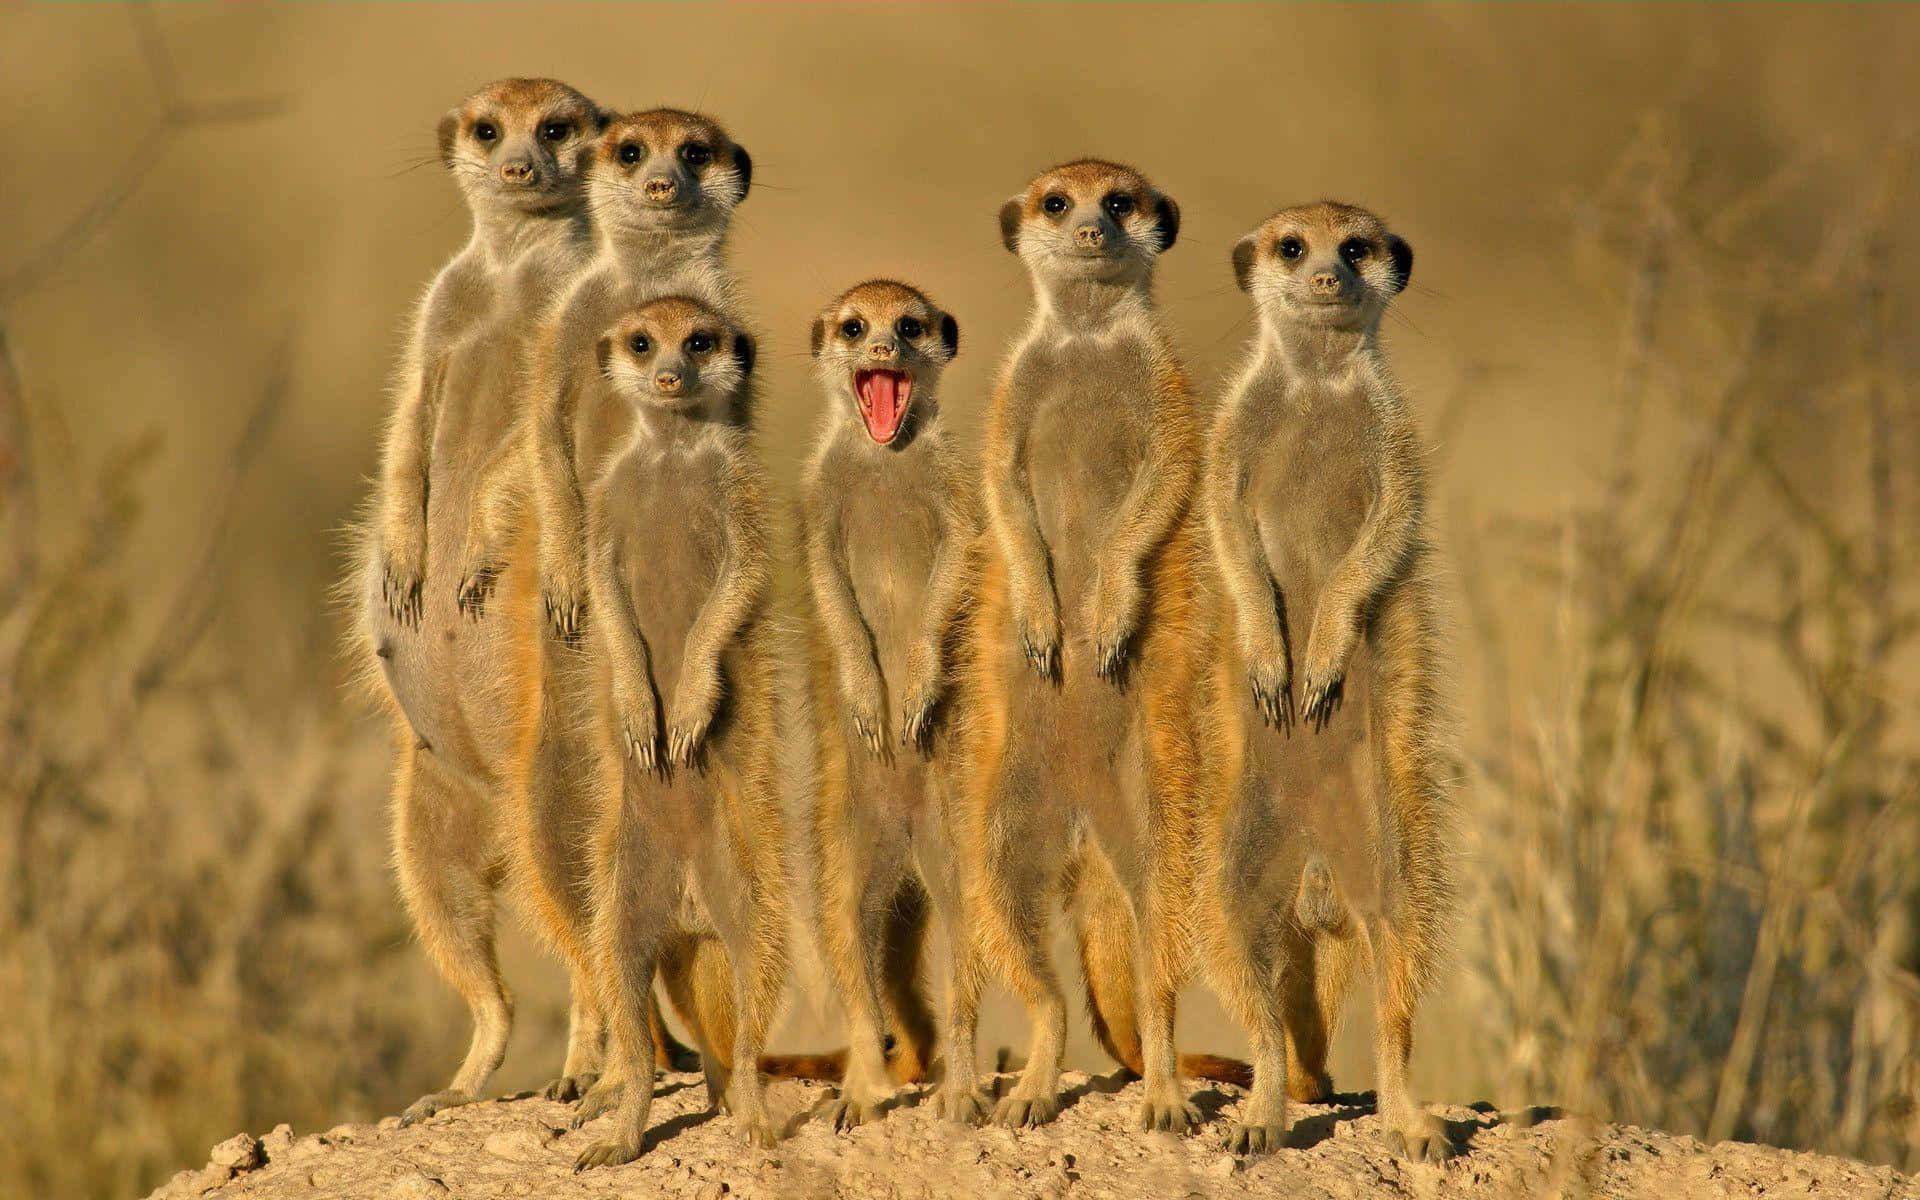 A Group Of Meerkats Standing In A Field